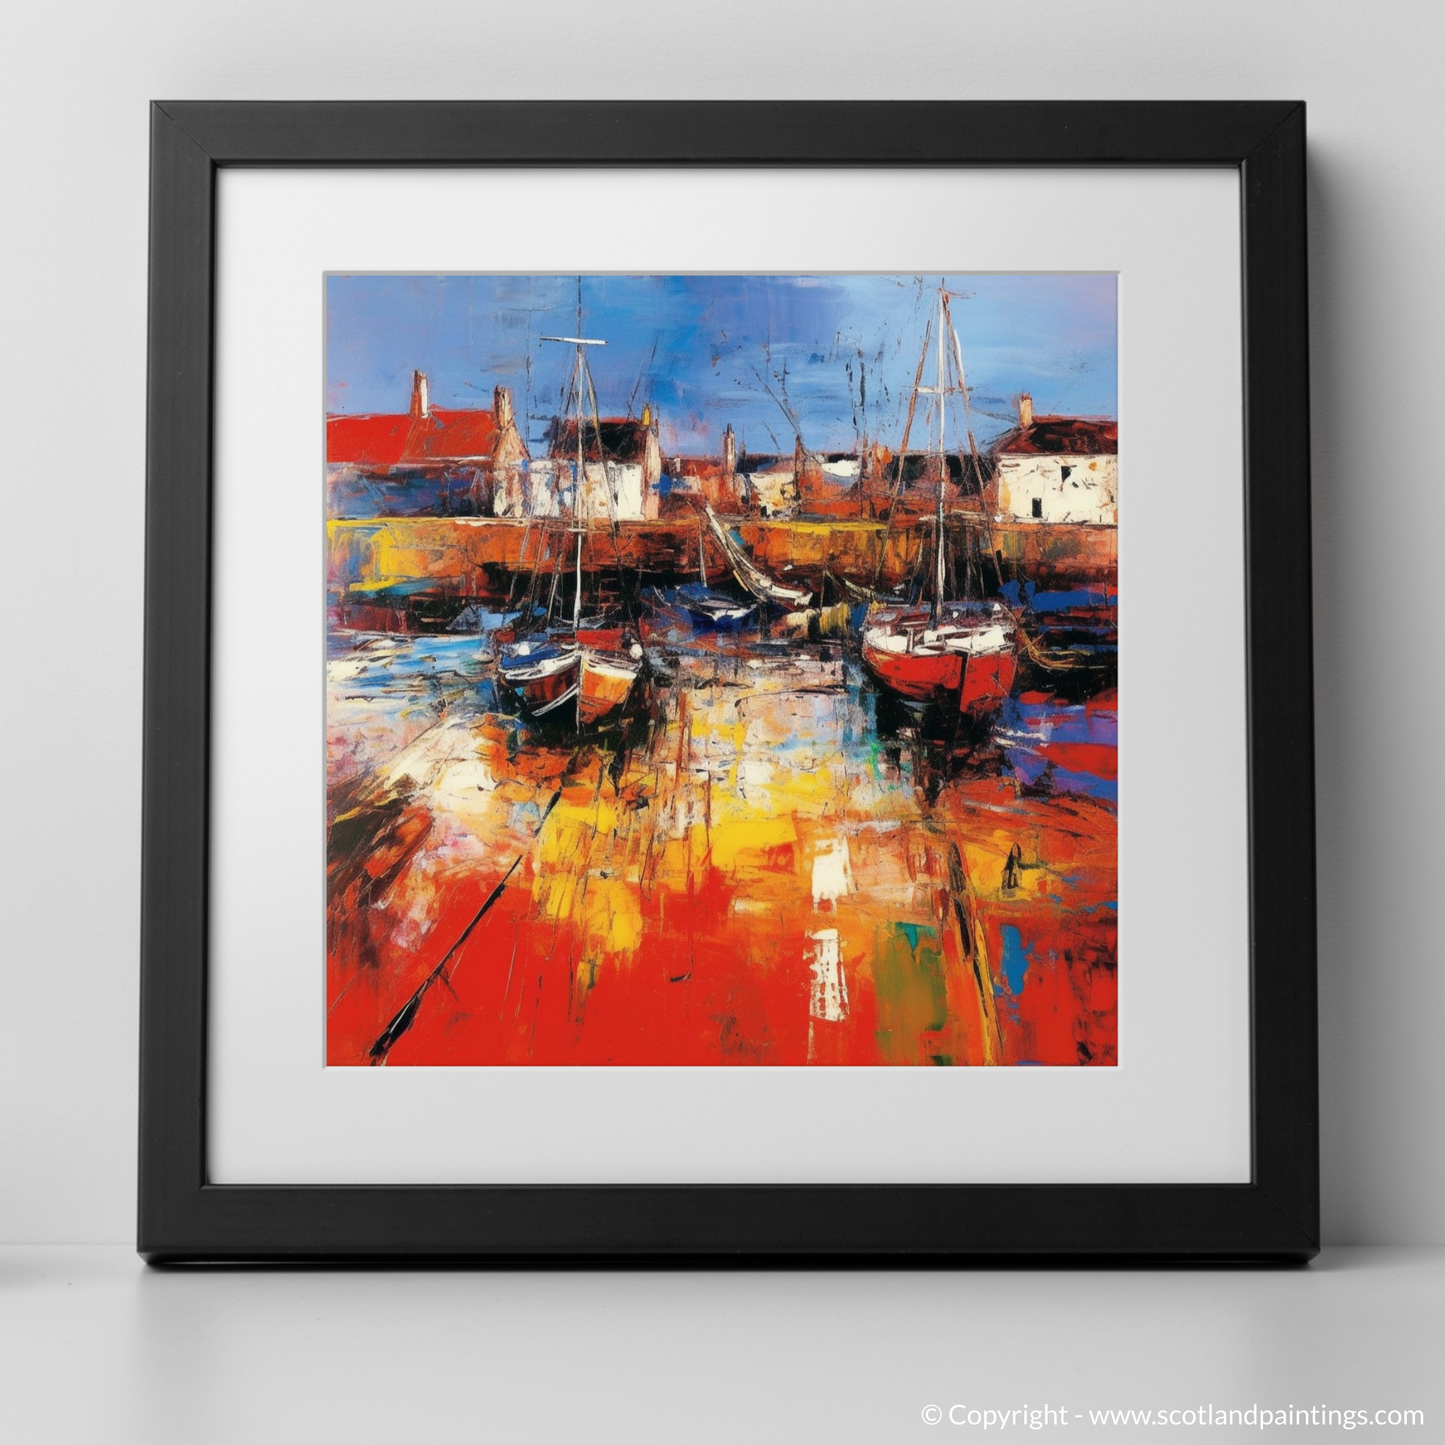 Harbour Hues: An Abstract Voyage through North Berwick